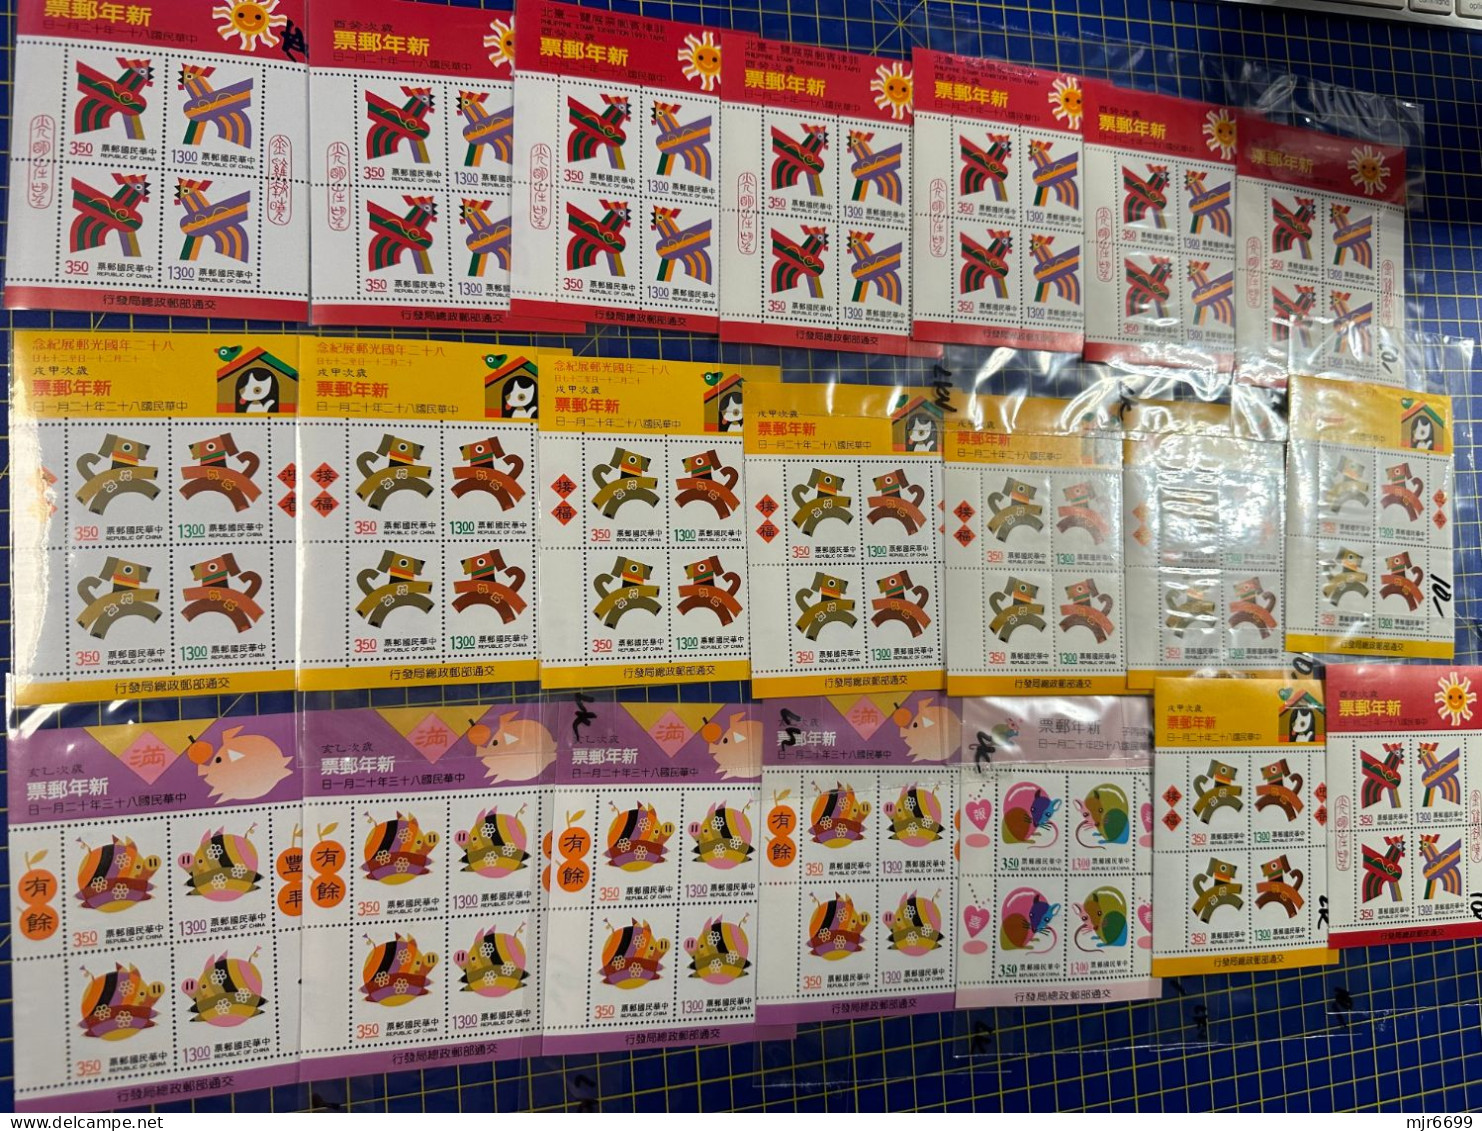 REPUBLIC OF CHINA, TAIWAN, 1992 ++ LUNAR YEAR S\S LOT OF 22 SHEETS FACE VALUE 700NT$++=22EUROS - Markenheftchen